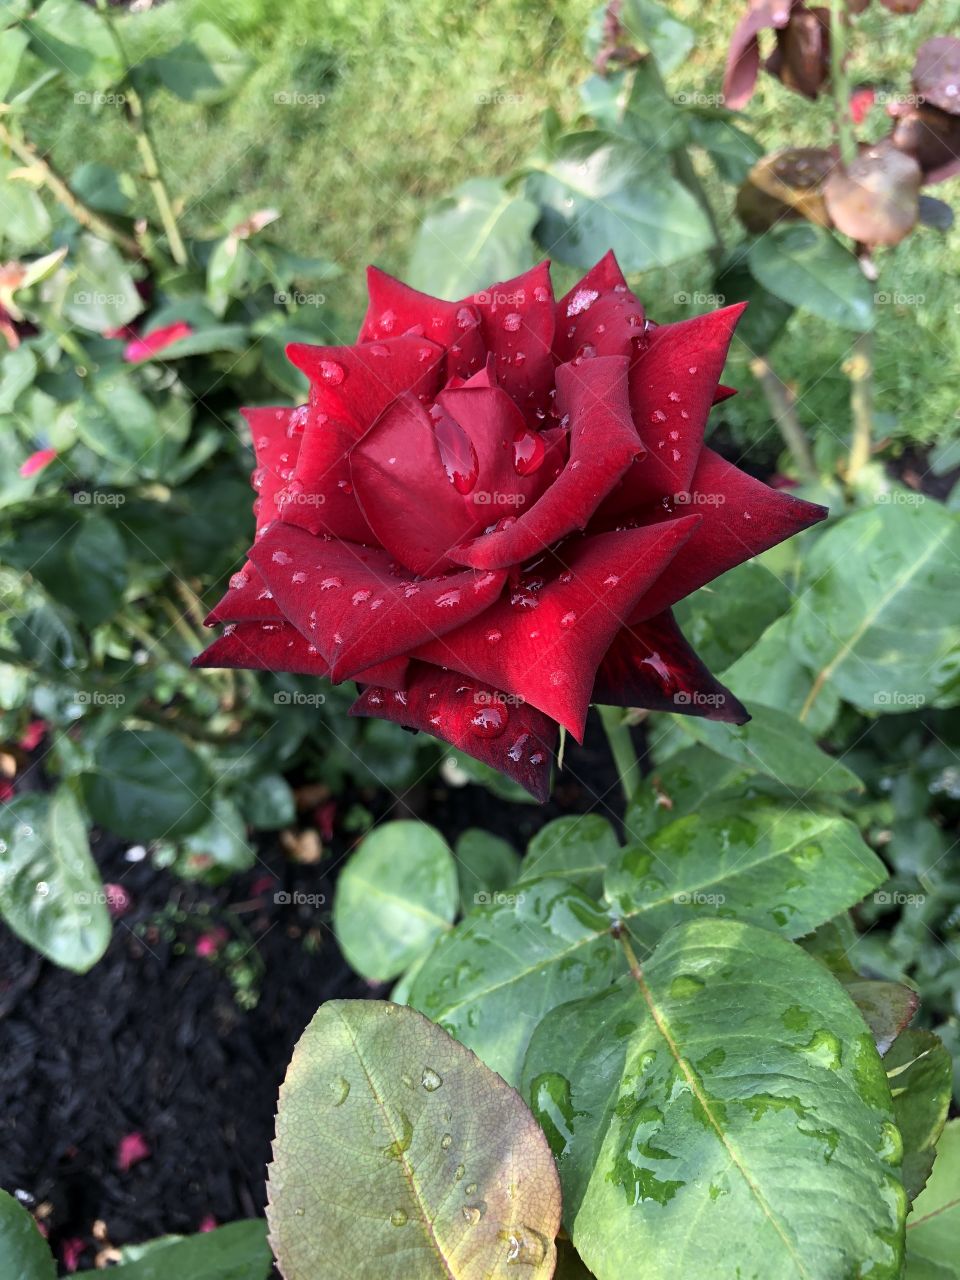 Watery rose